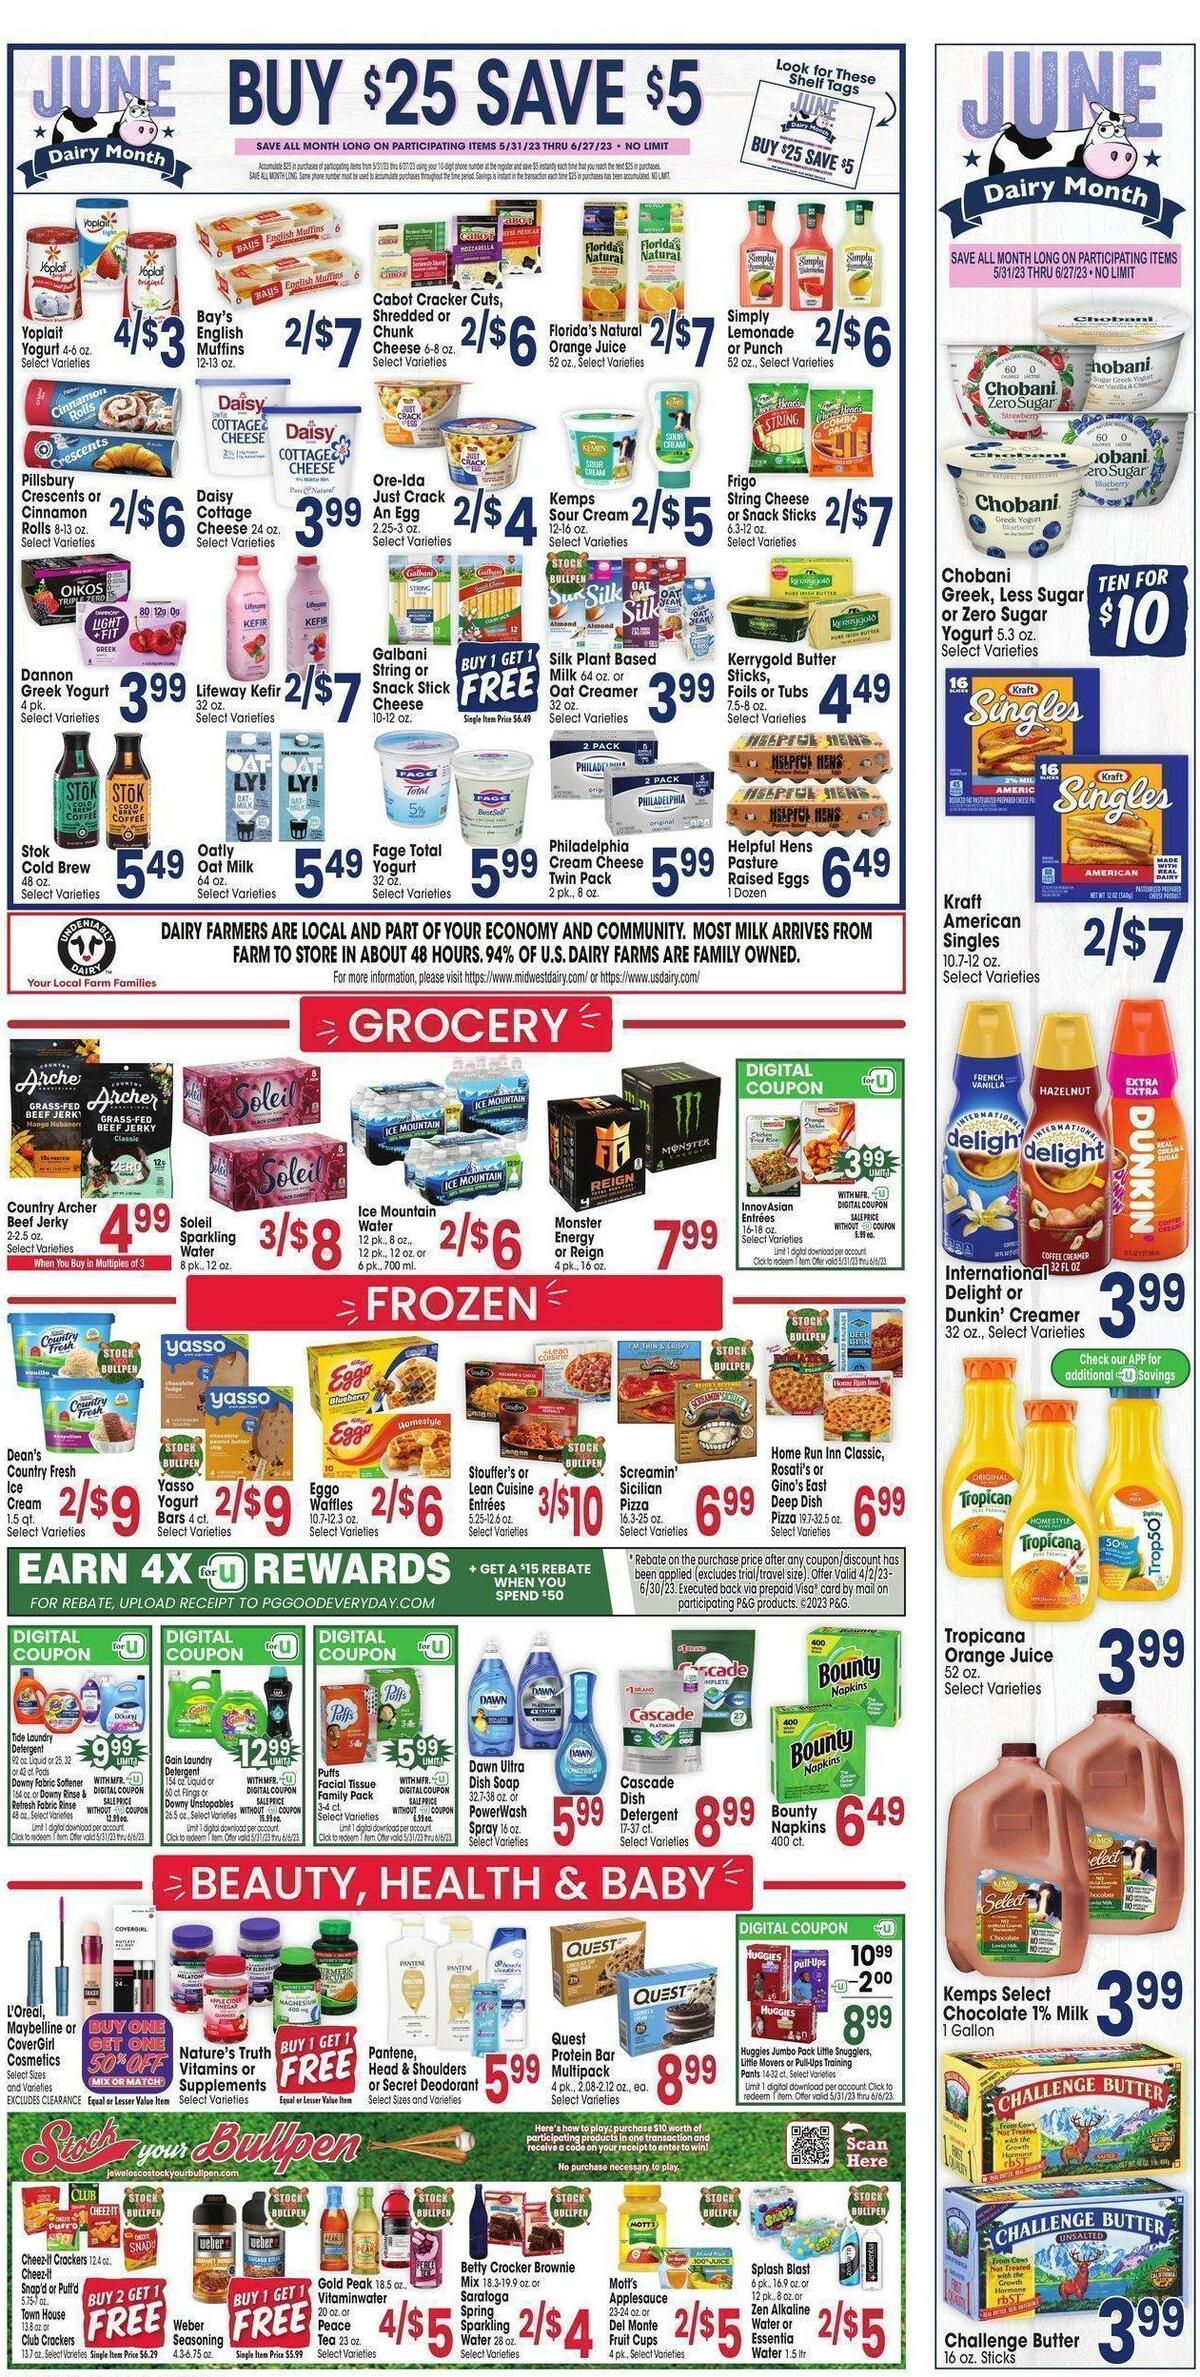 Jewel Osco Weekly Ad from May 31